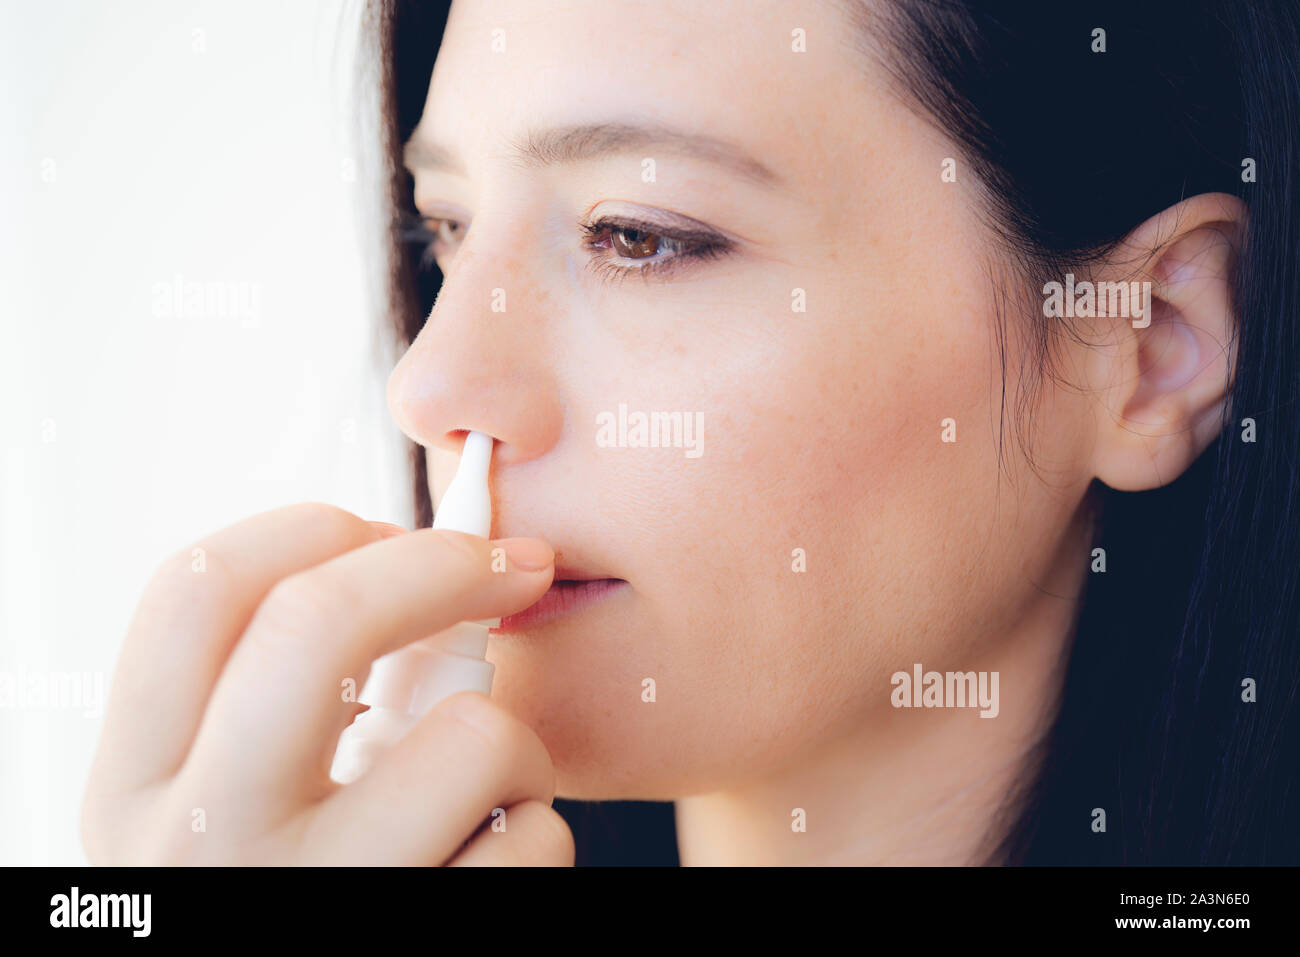 Nasal Spray. Closeup Of Beautiful Young Woman's Face With Nasal Drops. Close-up Of Female Spraying Medical Nasal Spray In Her Nose. Cold And Flu, Heal Stock Photo